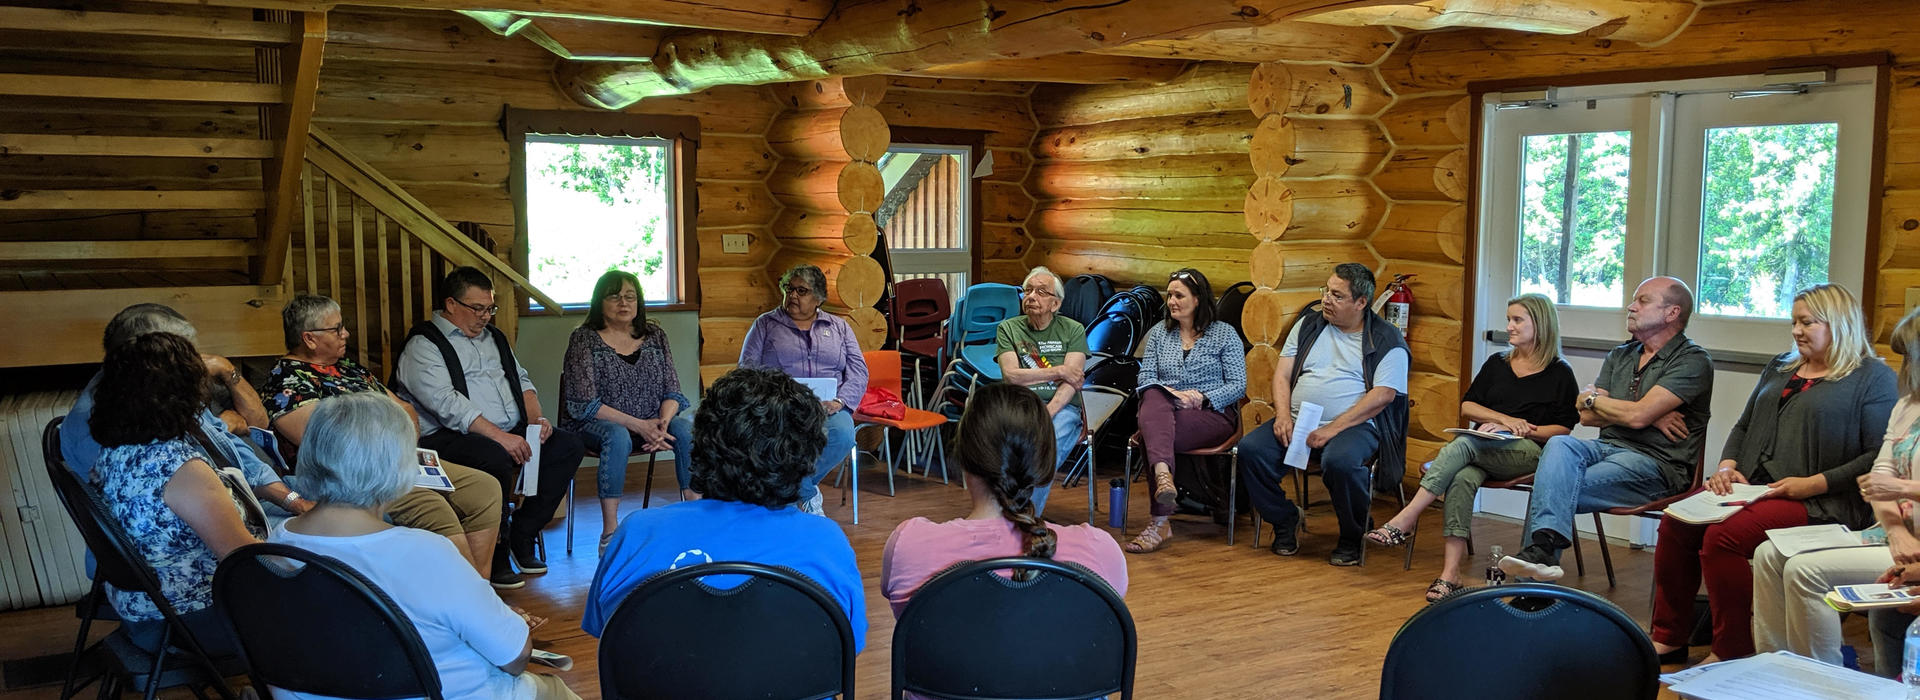 I-CARE Phase 1 meeting of all participating sites at the South Bay Community Centre, Wiikwemkoong Unceded Territory on Manitoulin Island, Ontario, Canada, June 2019.